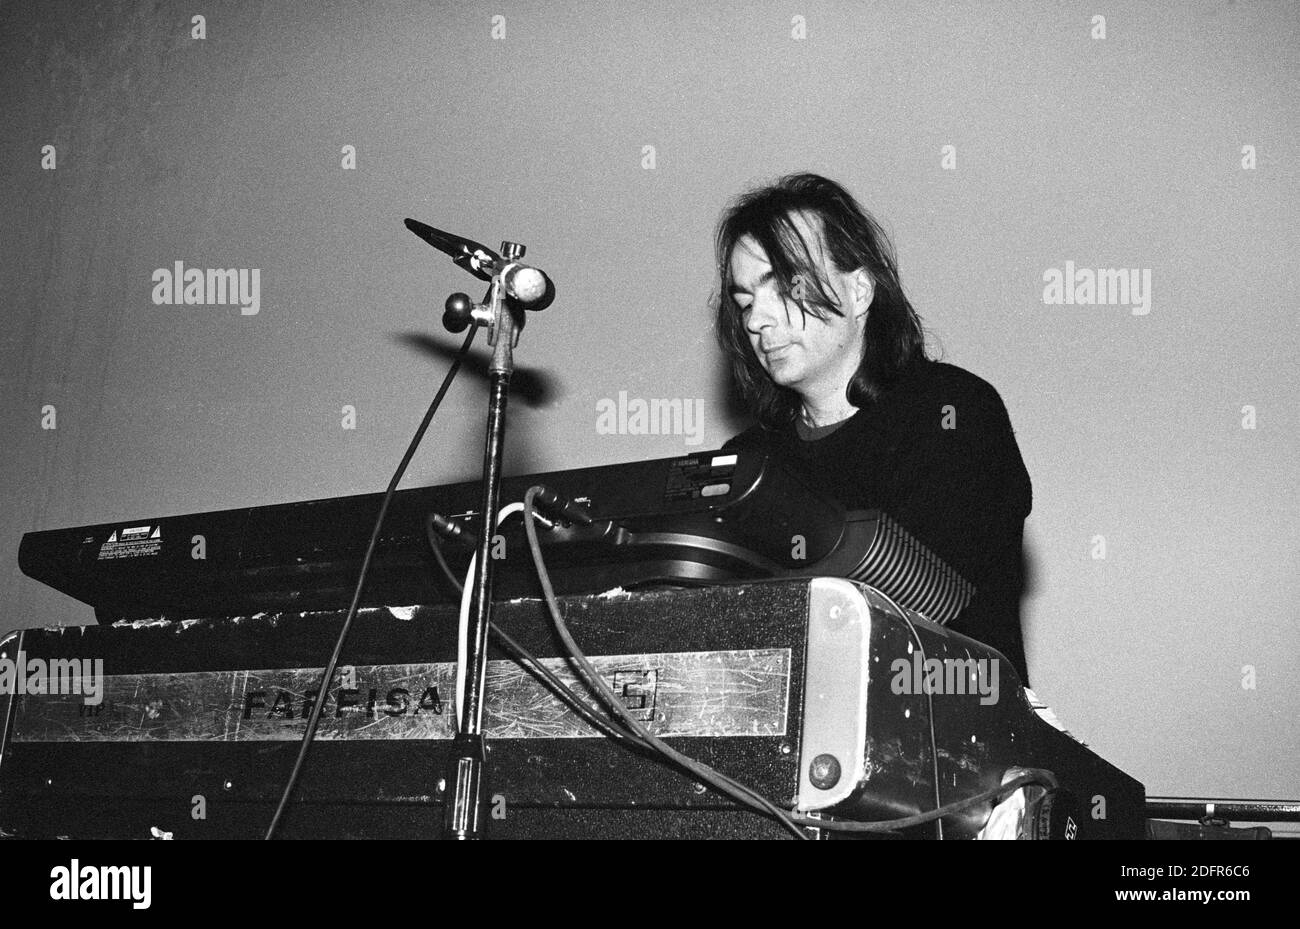 Keyboard player Andrew Todd performing with The Chills at the Bowen West Theatre, Bedford, UK, 3rd March 1990. Stock Photo